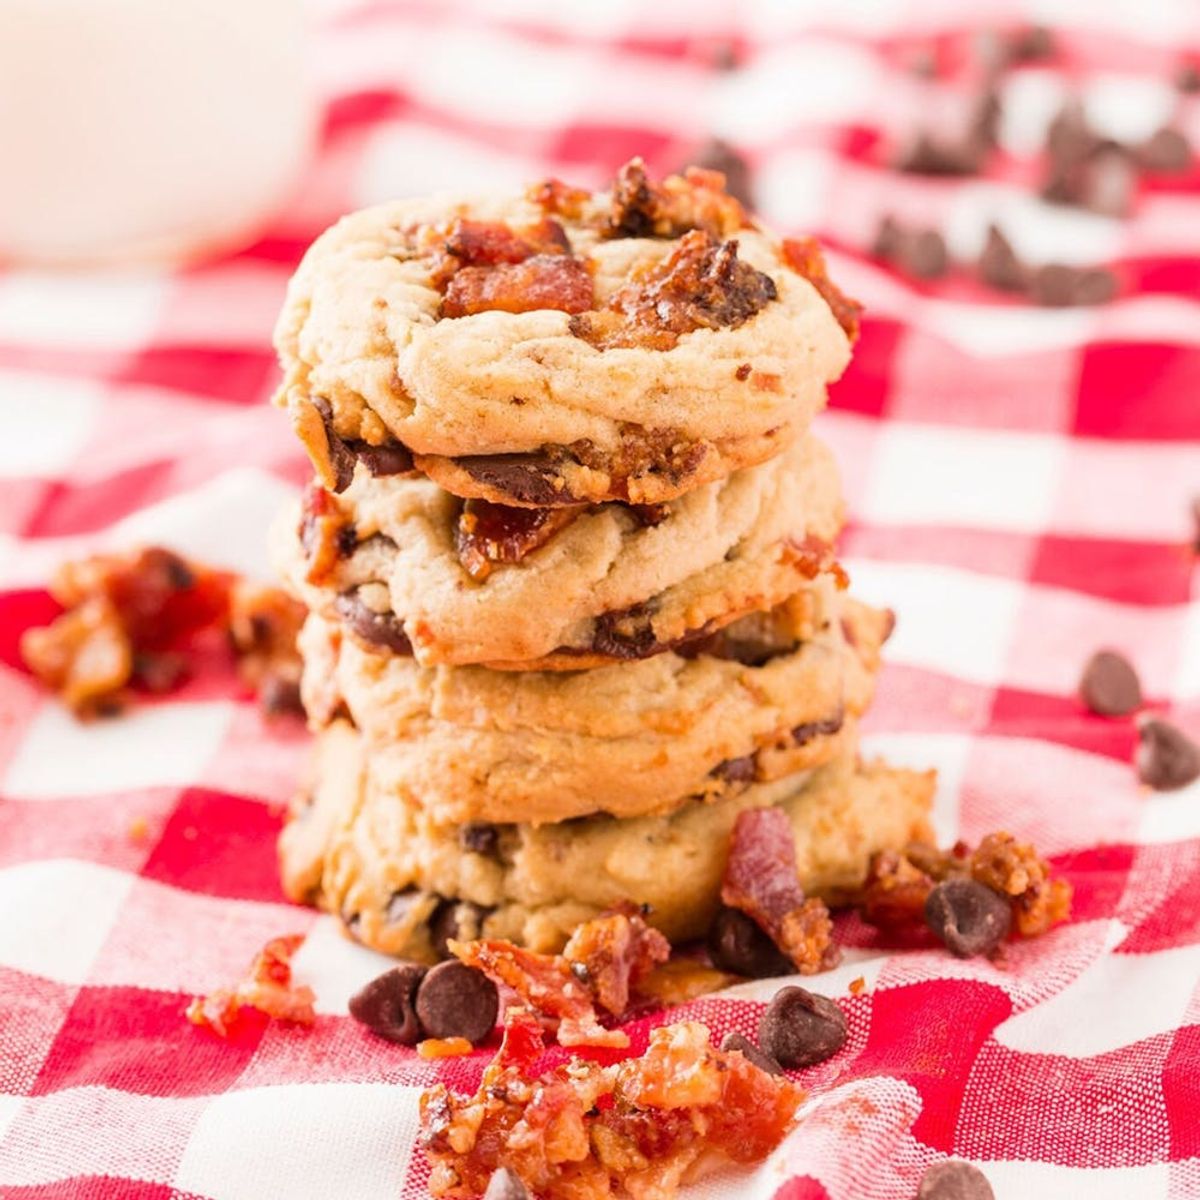 Get the Dessert Party Started With Bacon Chocolate Chip Cookies